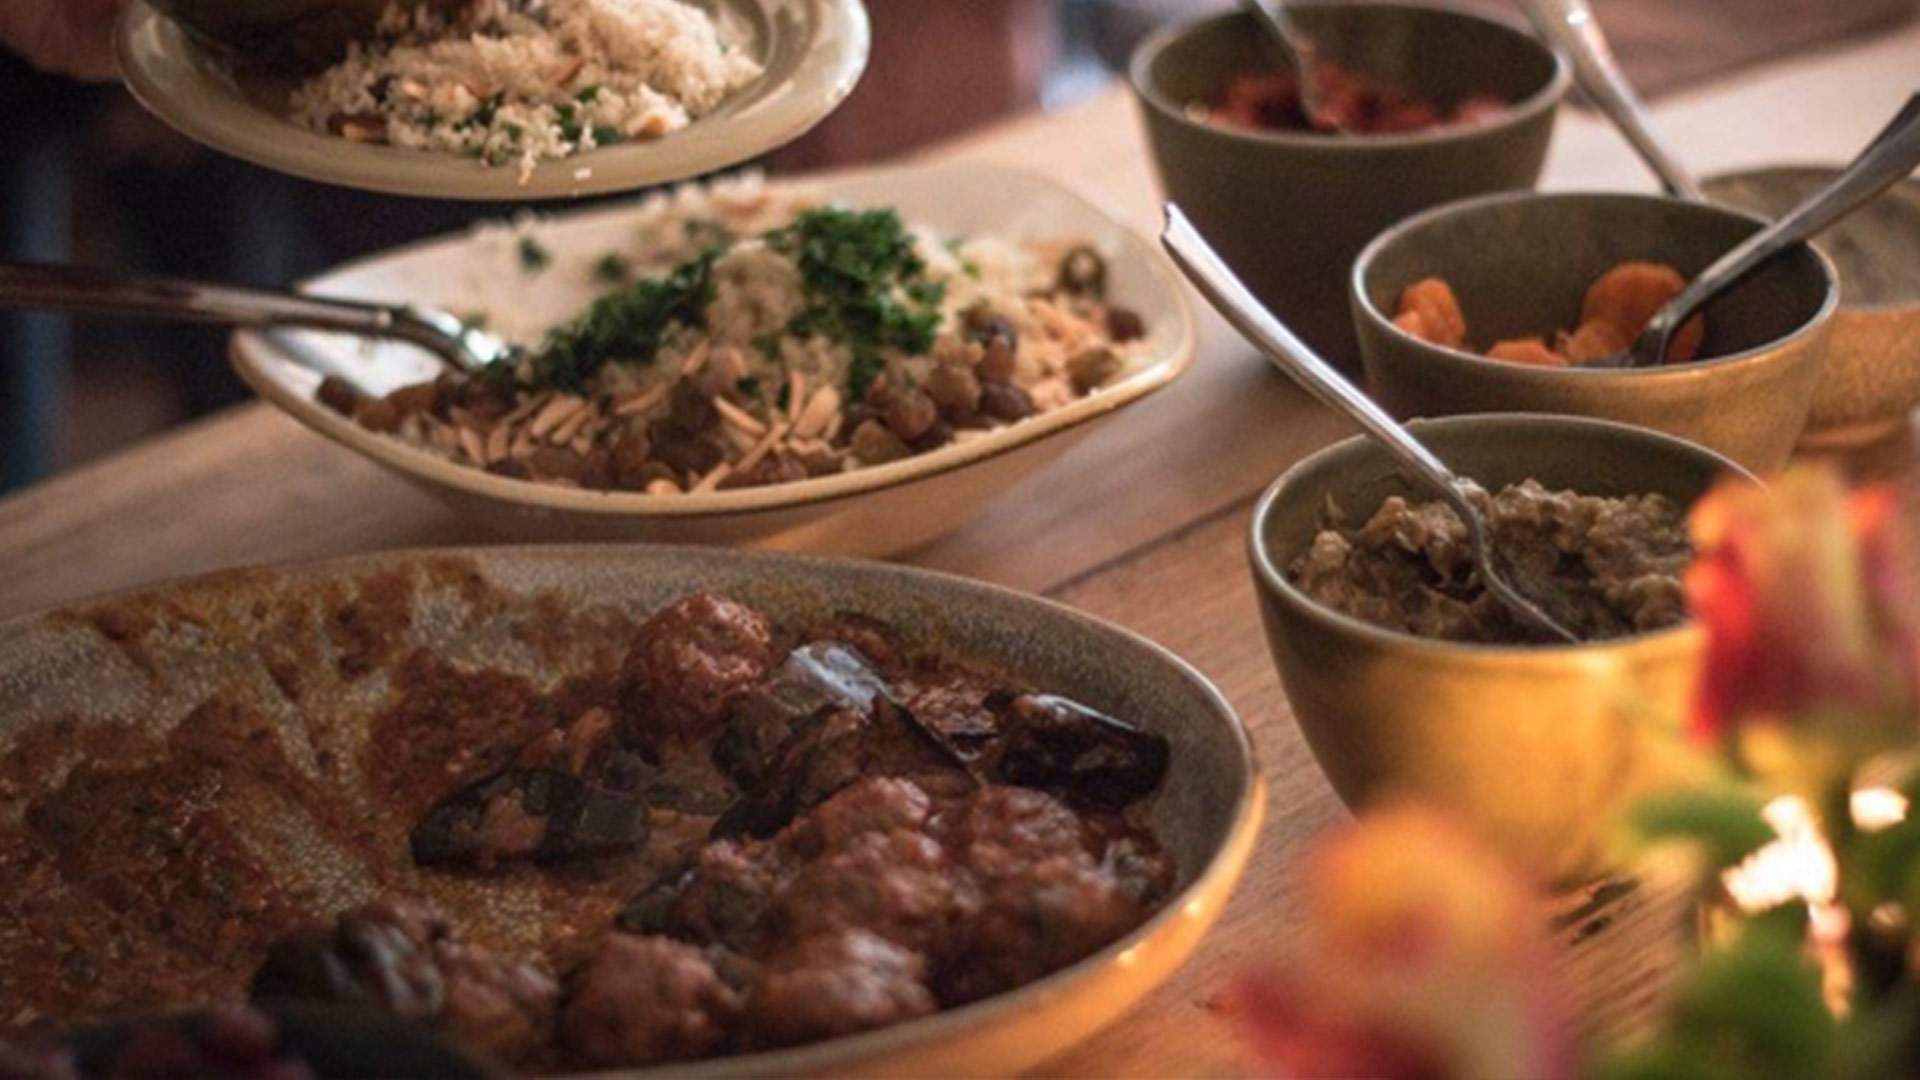 Middle Eats: The Iftar Feast